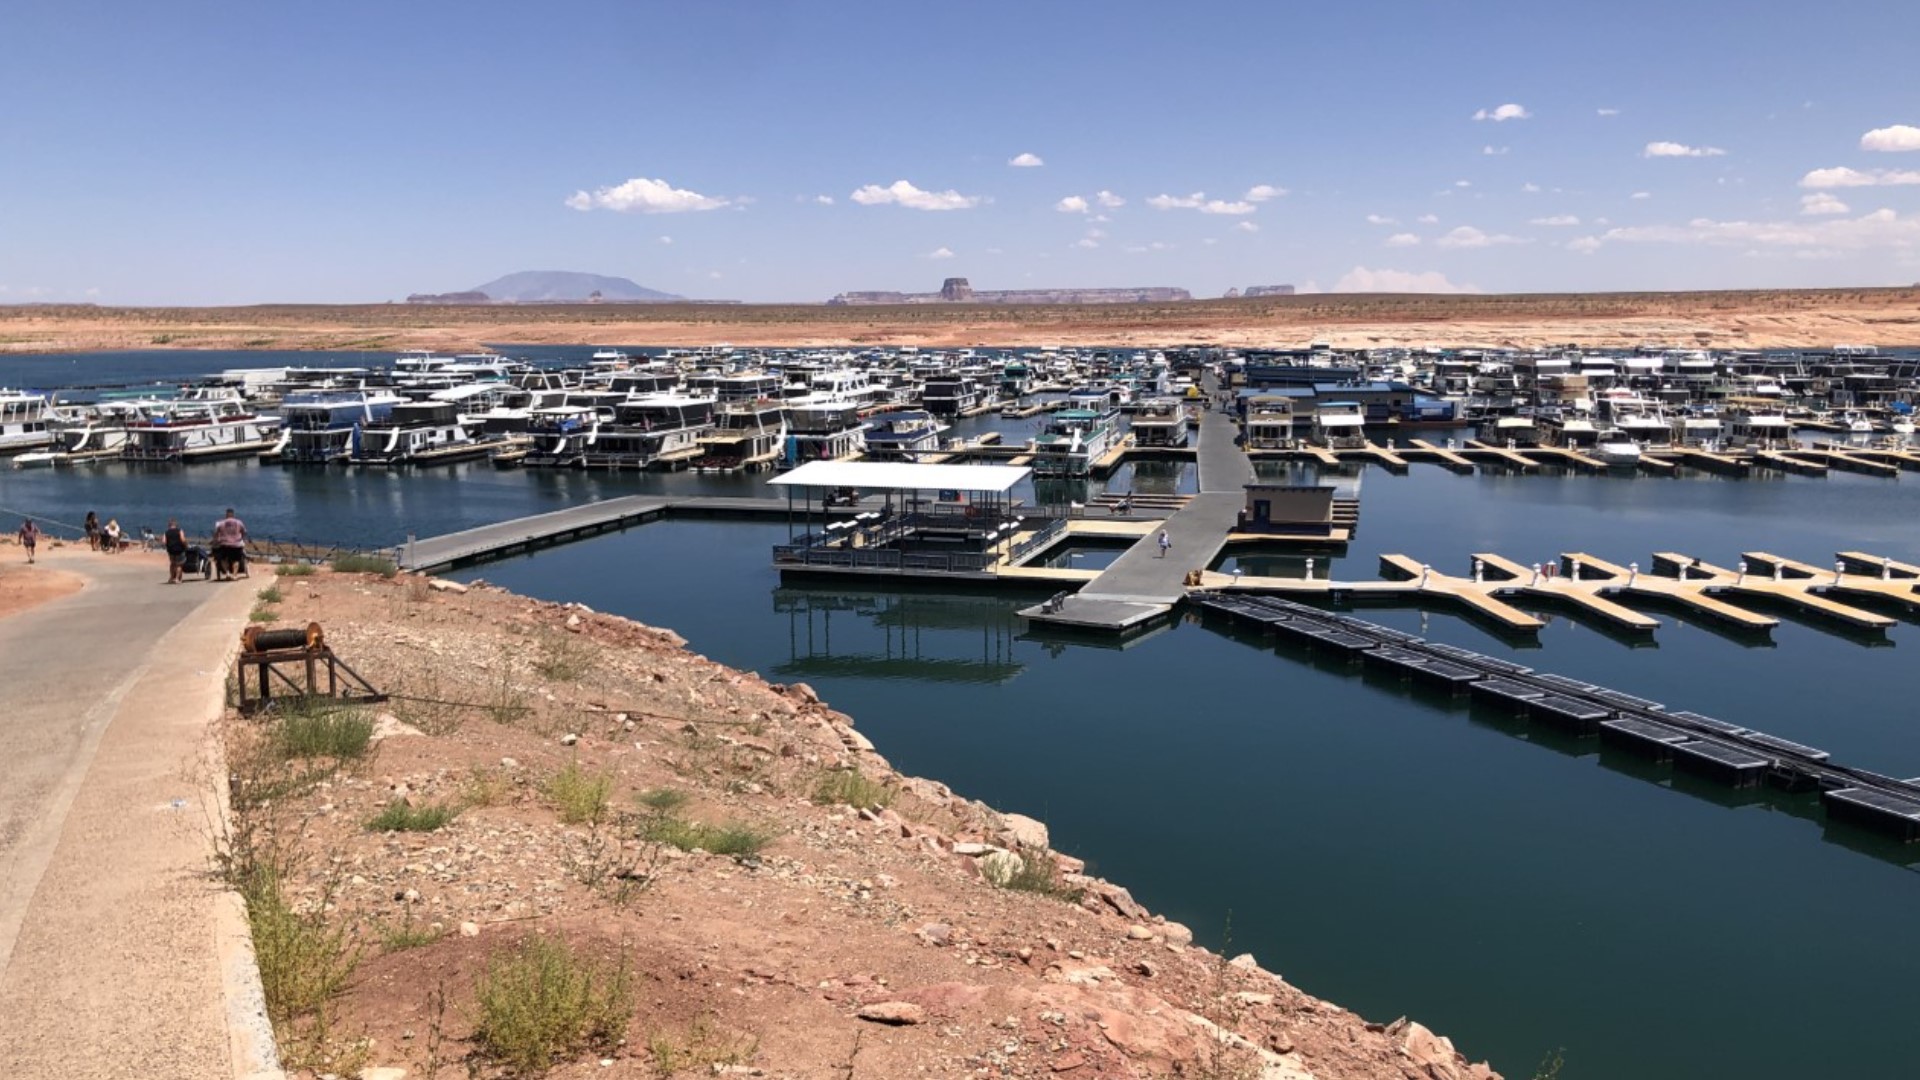 Page, Arizona depends on Lake Powell for drinking water and tourism.